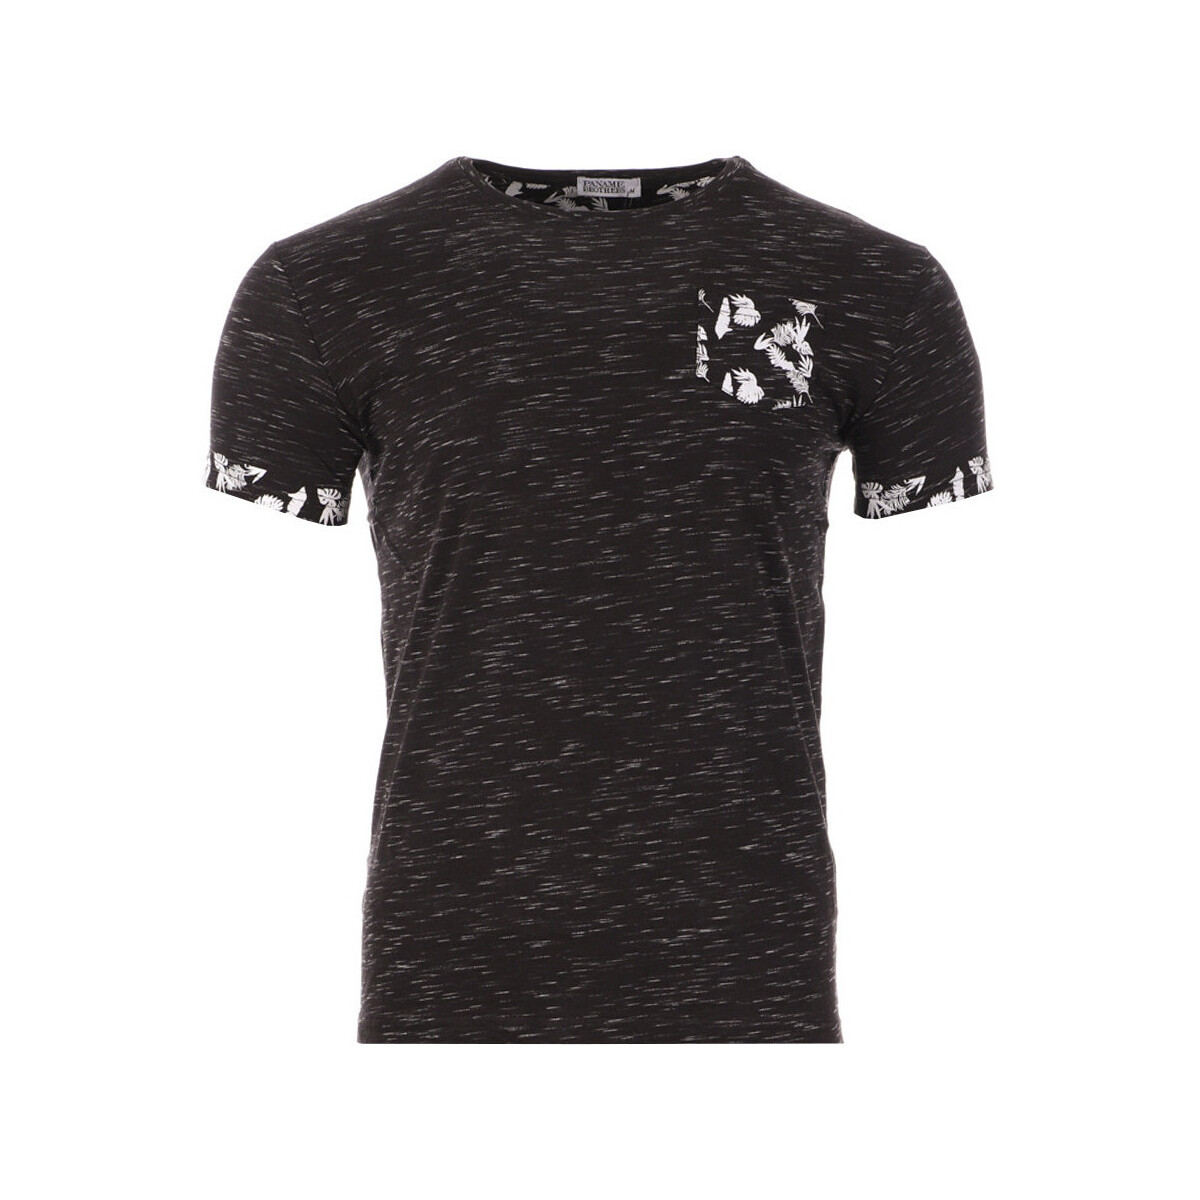 Textiel Heren T-shirts & Polo’s Paname Brothers  Zwart